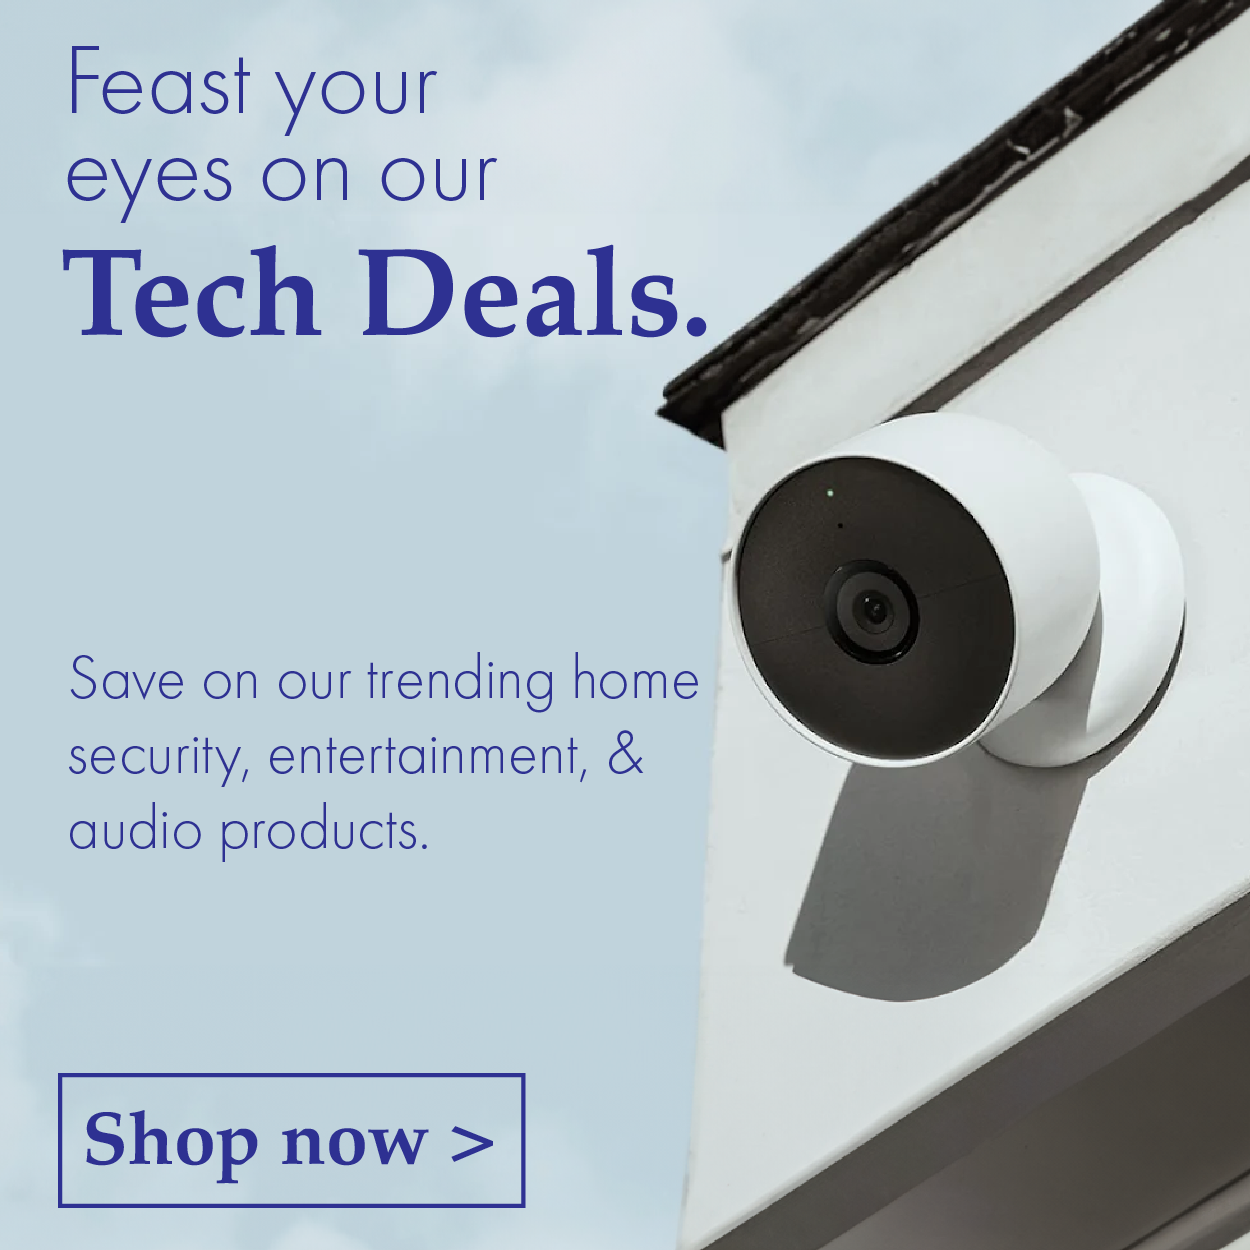 Feast your eyes on our tech deals. Save on our trending home security, entertainment, and audio products.